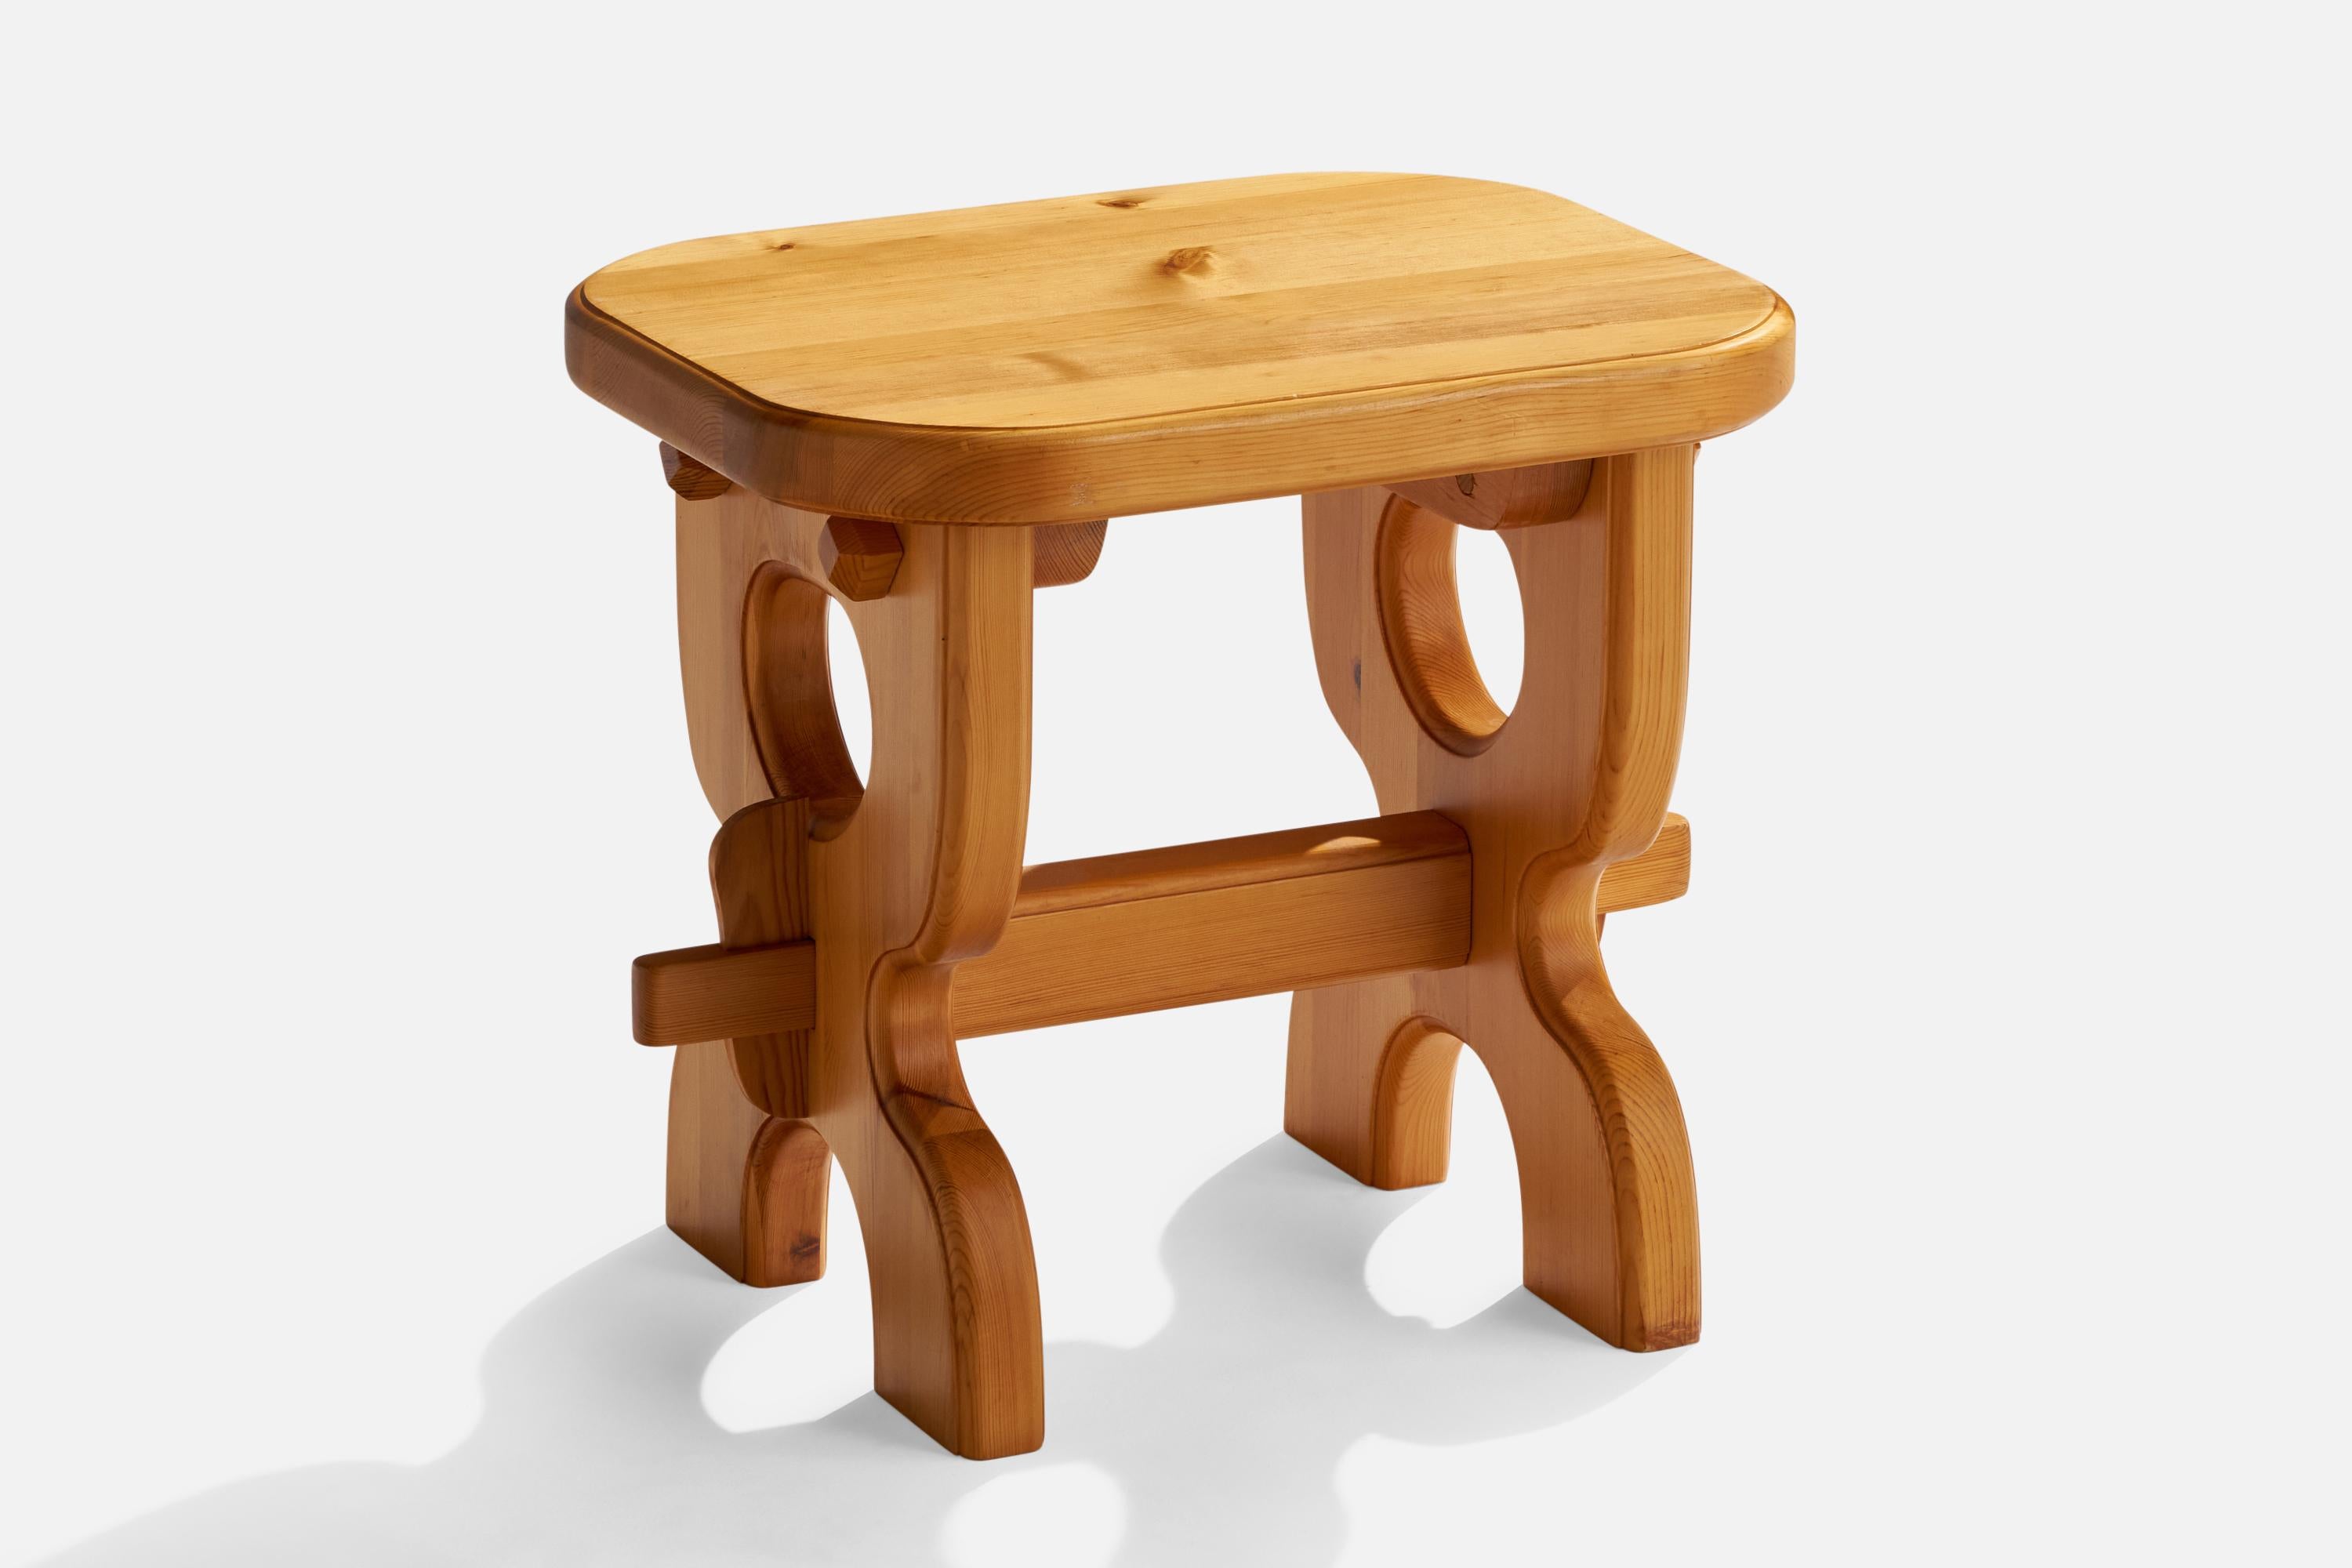 A pine side table or stool designed and produced in Sweden, dated 1996.